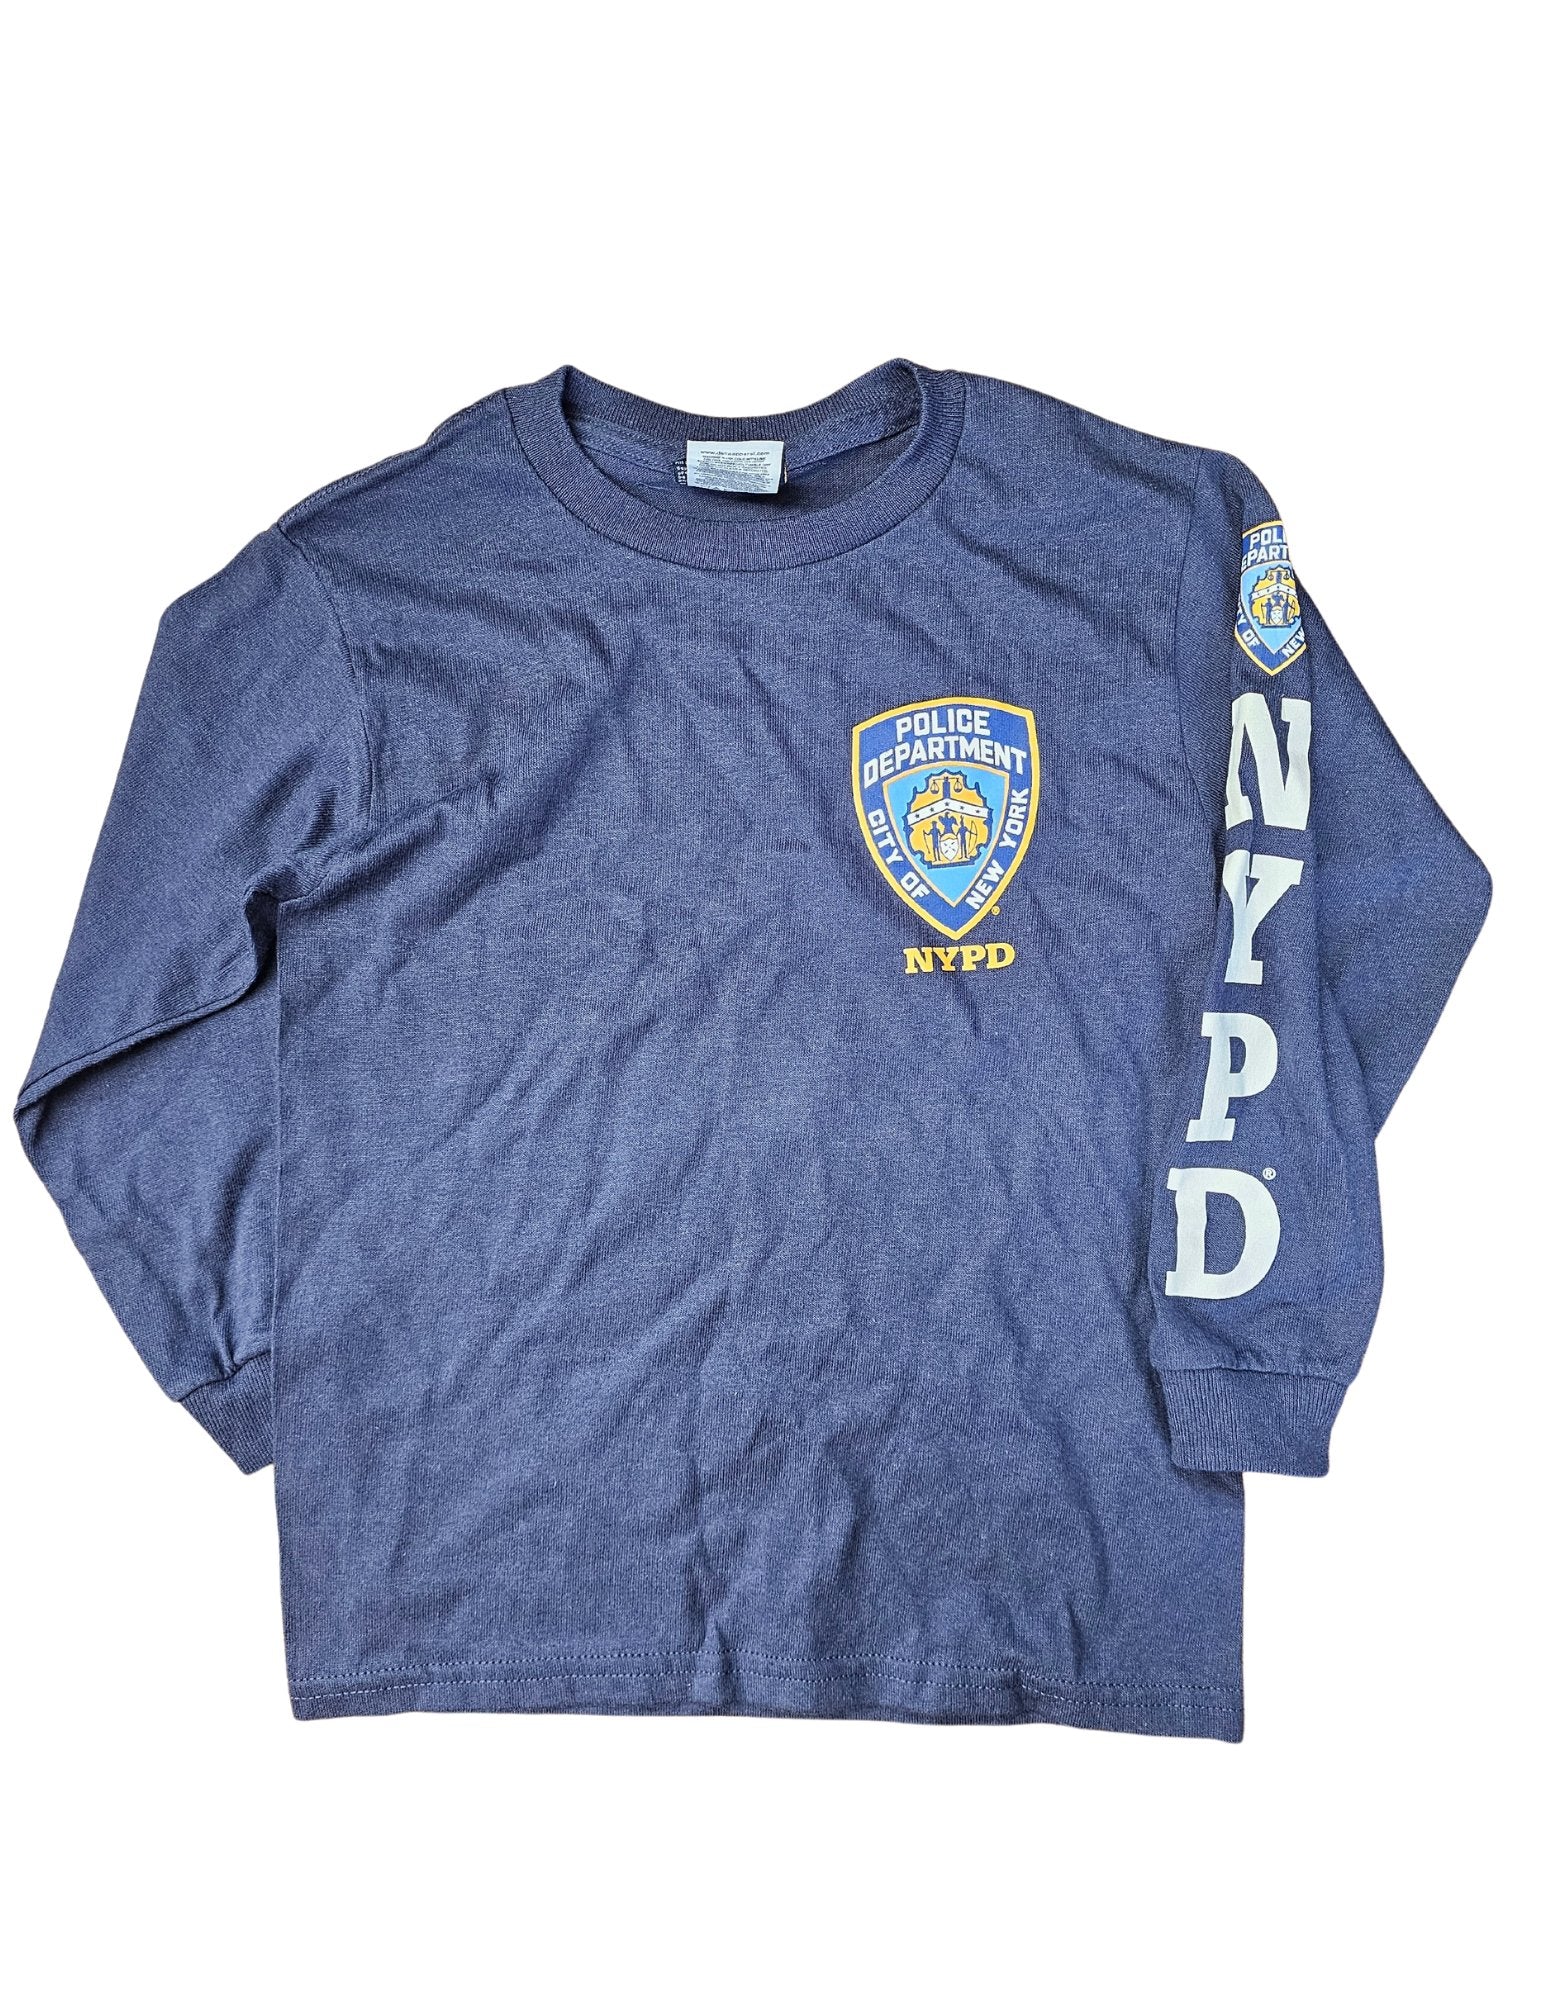 NYPD Kids Long Sleeve T-Shirt (Navy White, Chest & Sleeve Print)